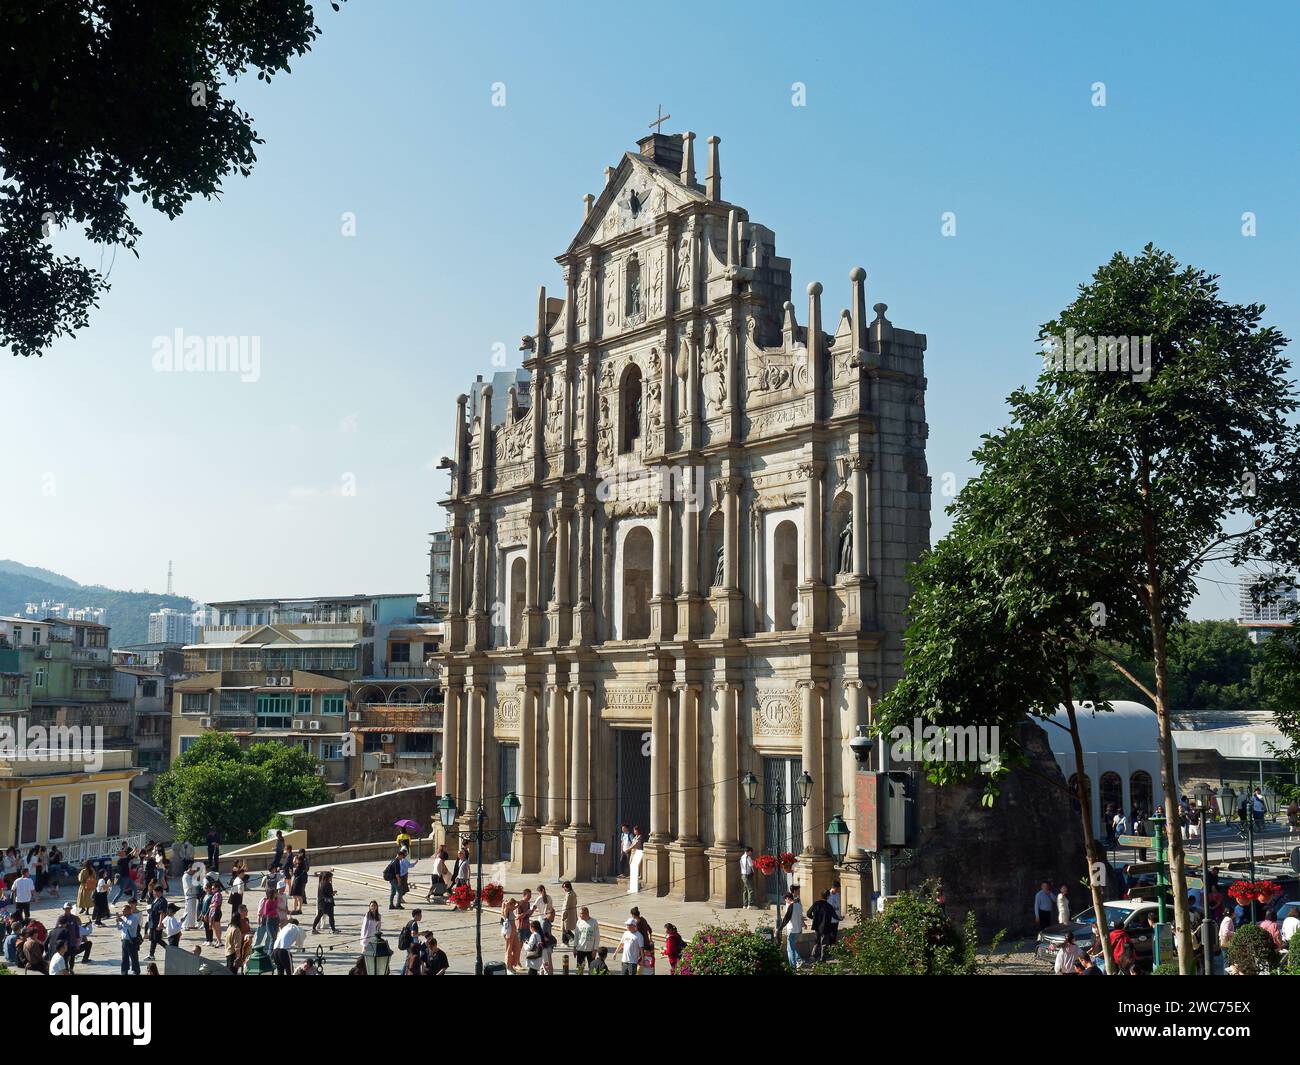 View looking down on the famous Ruins of St. Paul in Macau Stock Photo